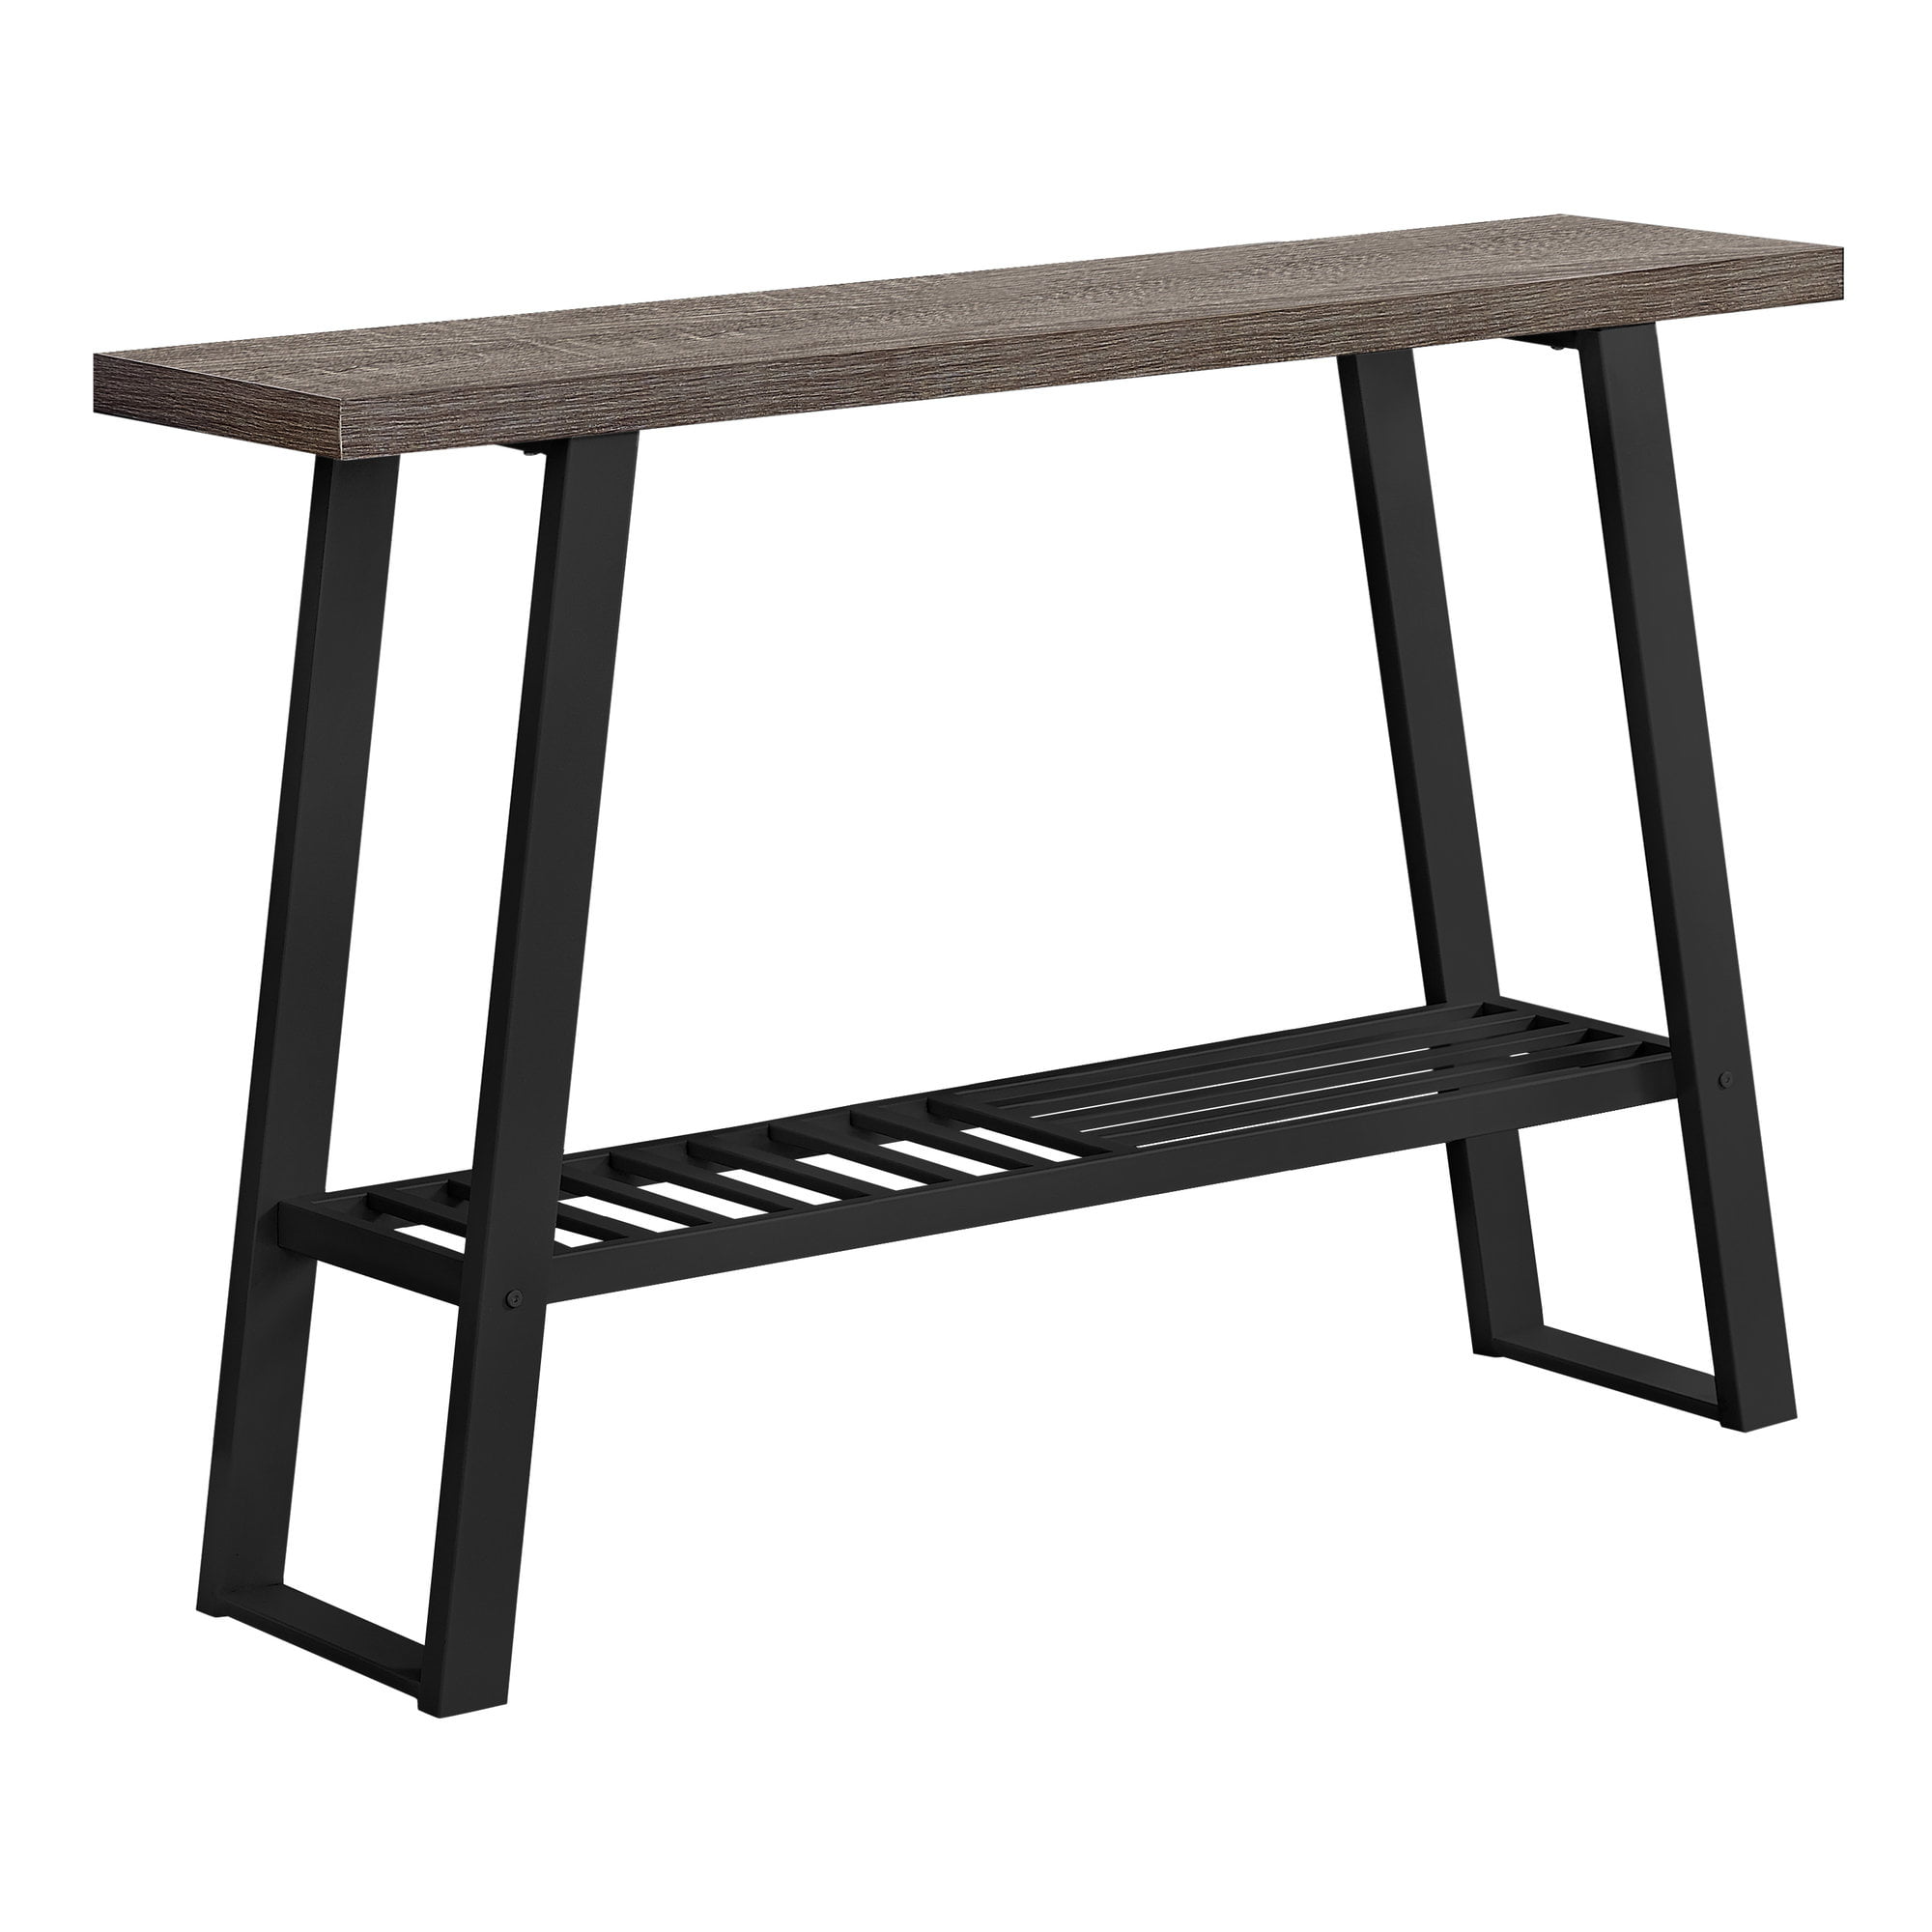 DARK TAUPE RECLAIMED-LOOK 36"L CONSOLE ACCENT TABLE 